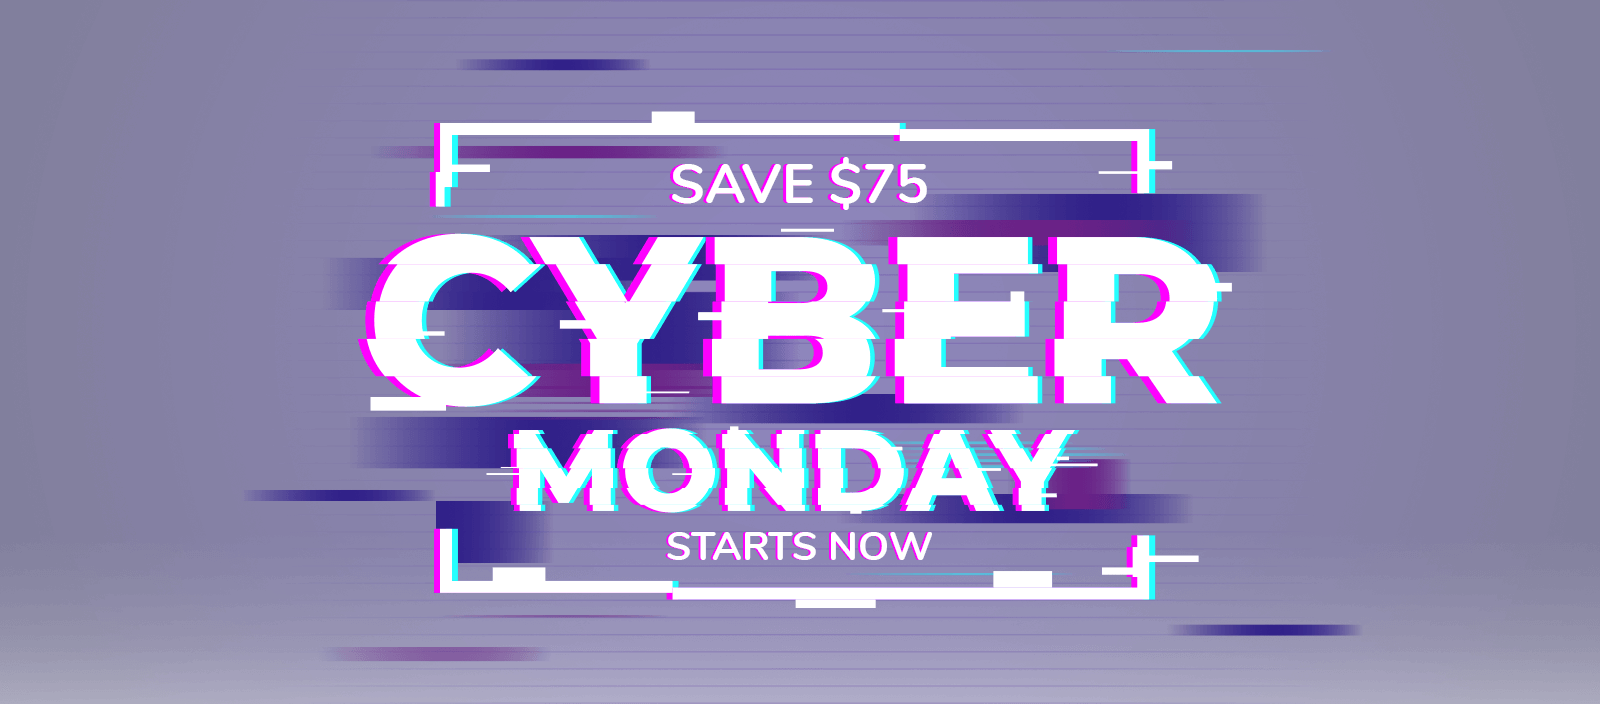 STARTS NOW CYBER MONDAY SAVE $75